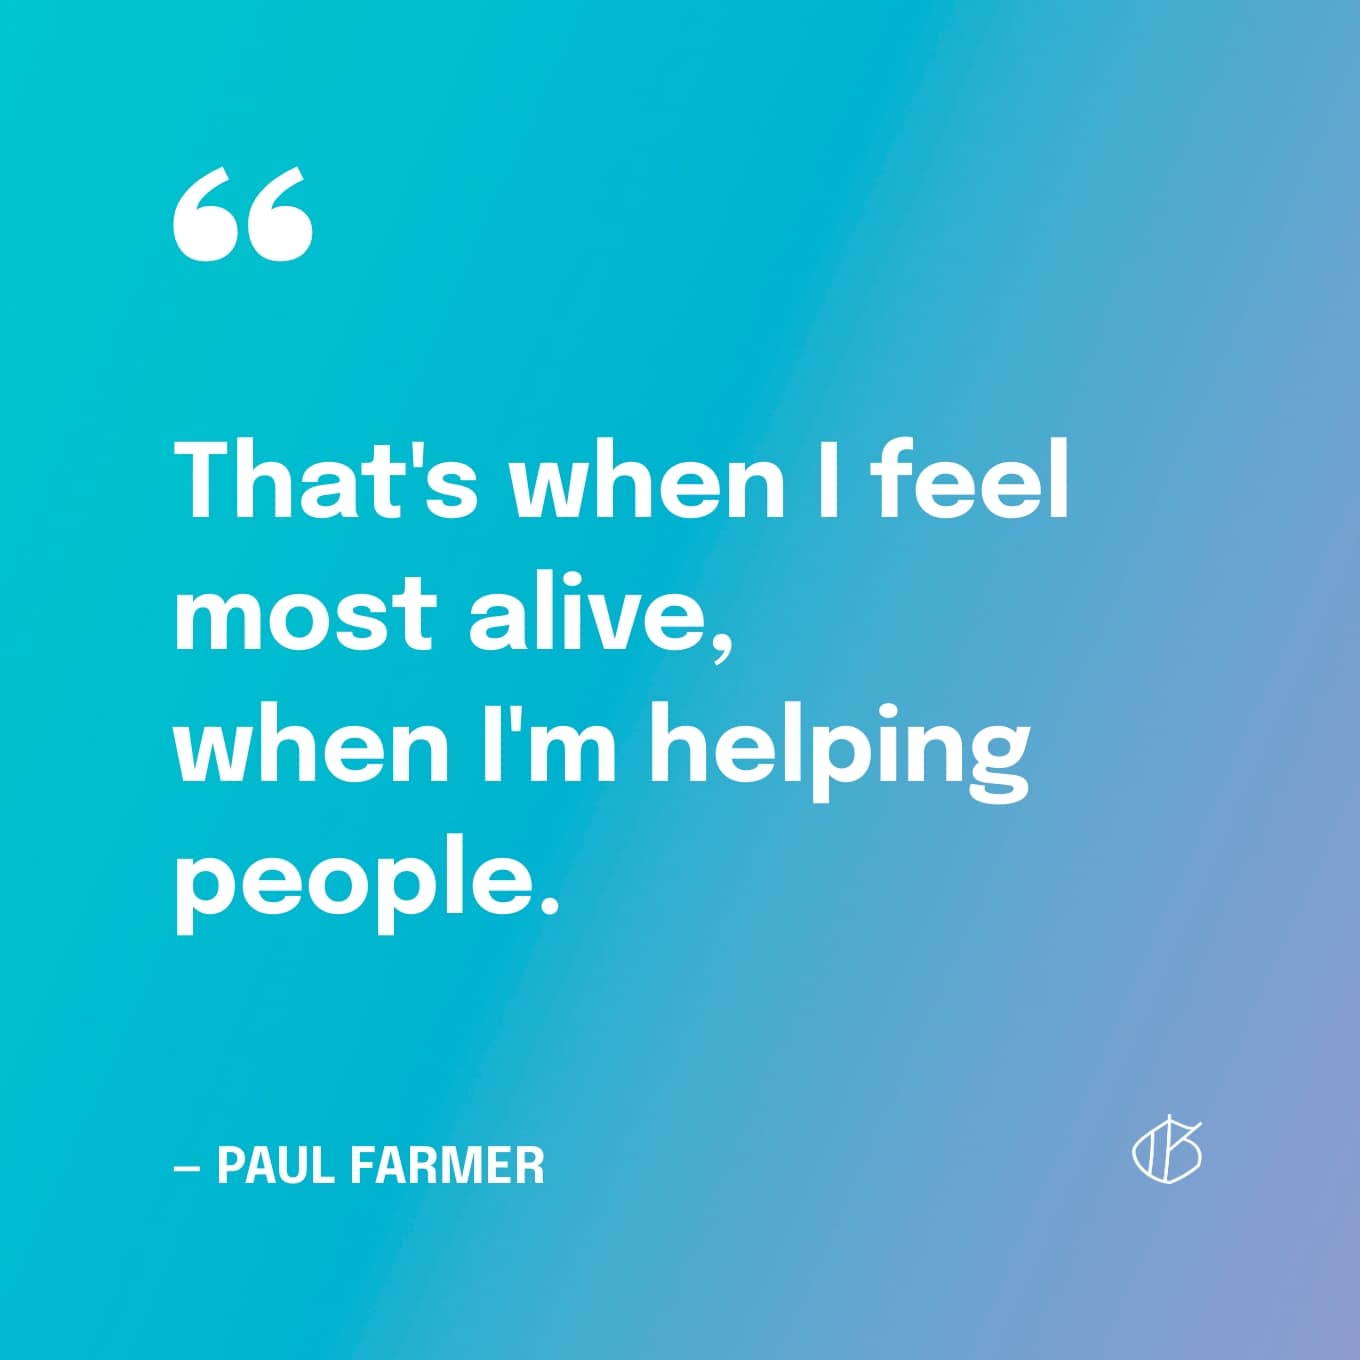 “That's when I feel most alive, when I'm helping people.” — Paul Farmer quotes